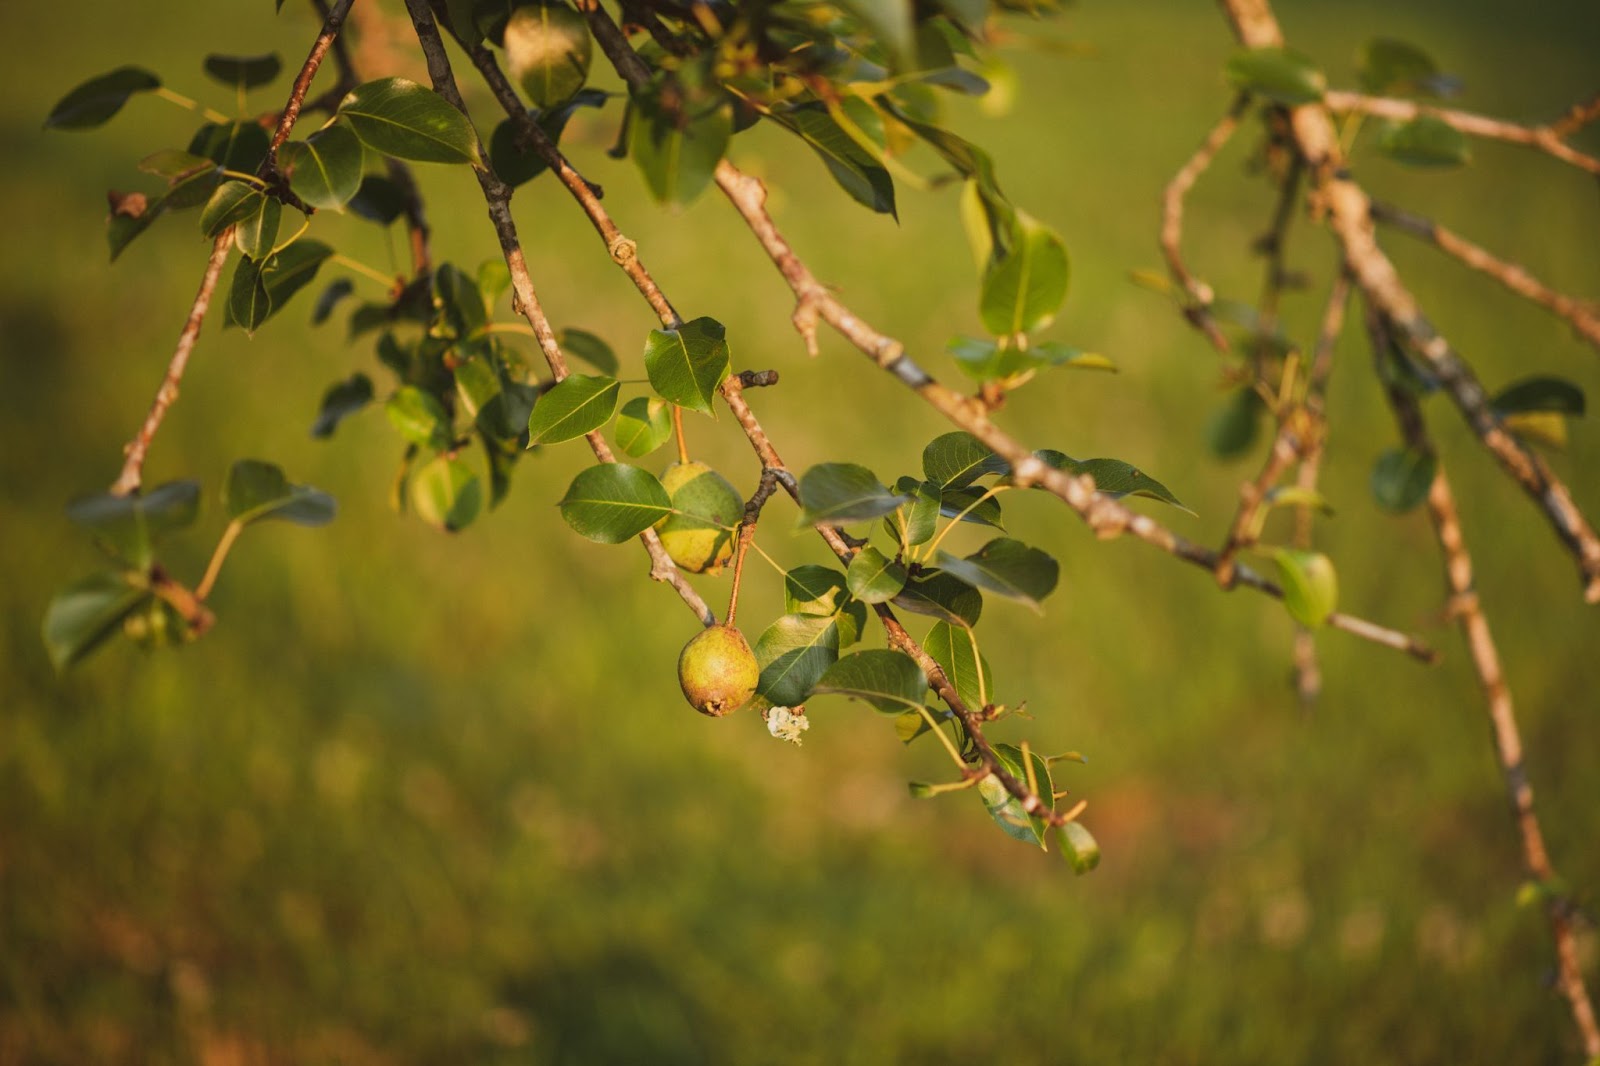  factors affect the fruit-bearing timeline of pear trees